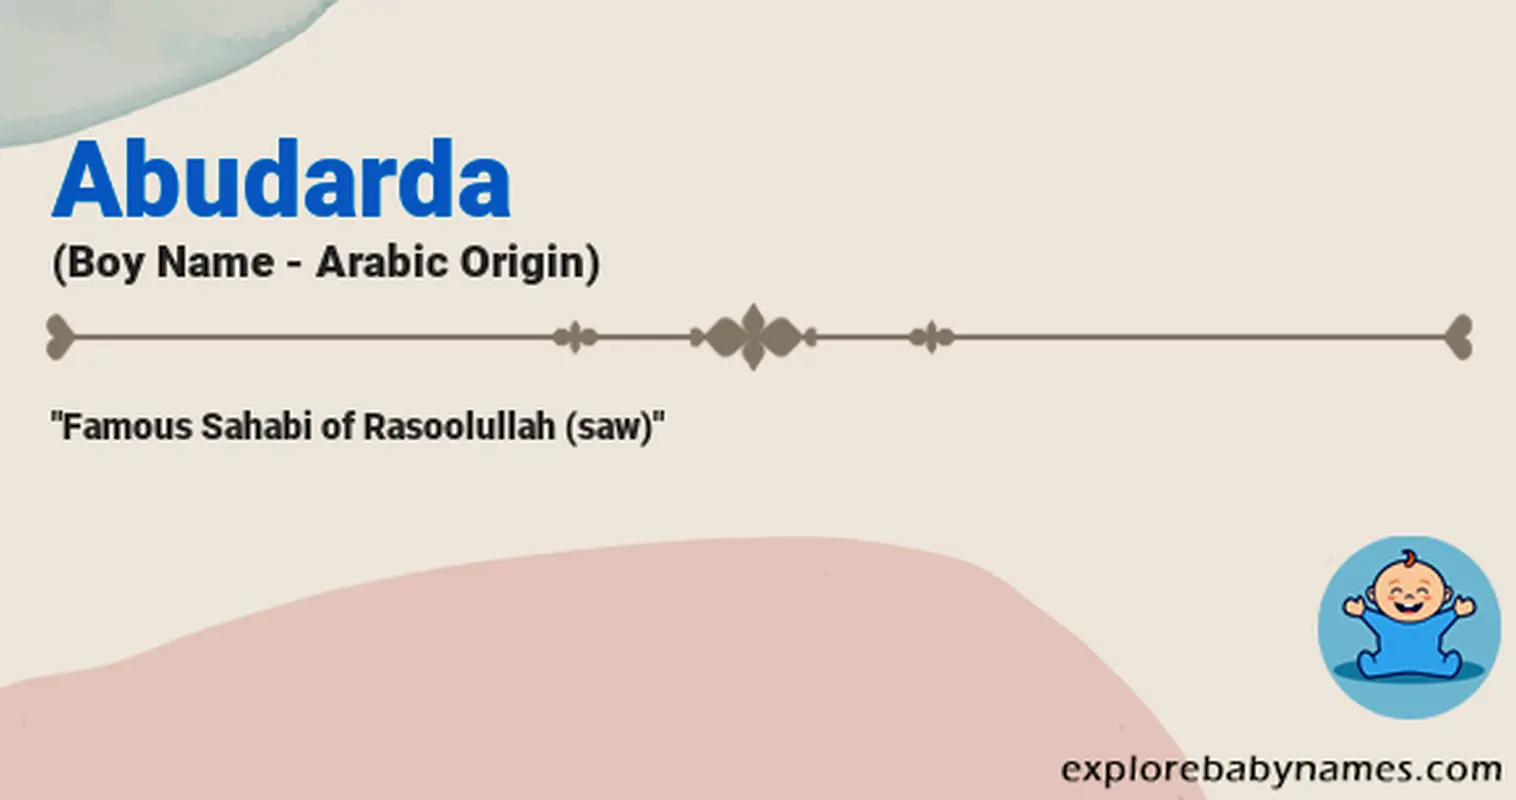 Meaning of Abudarda